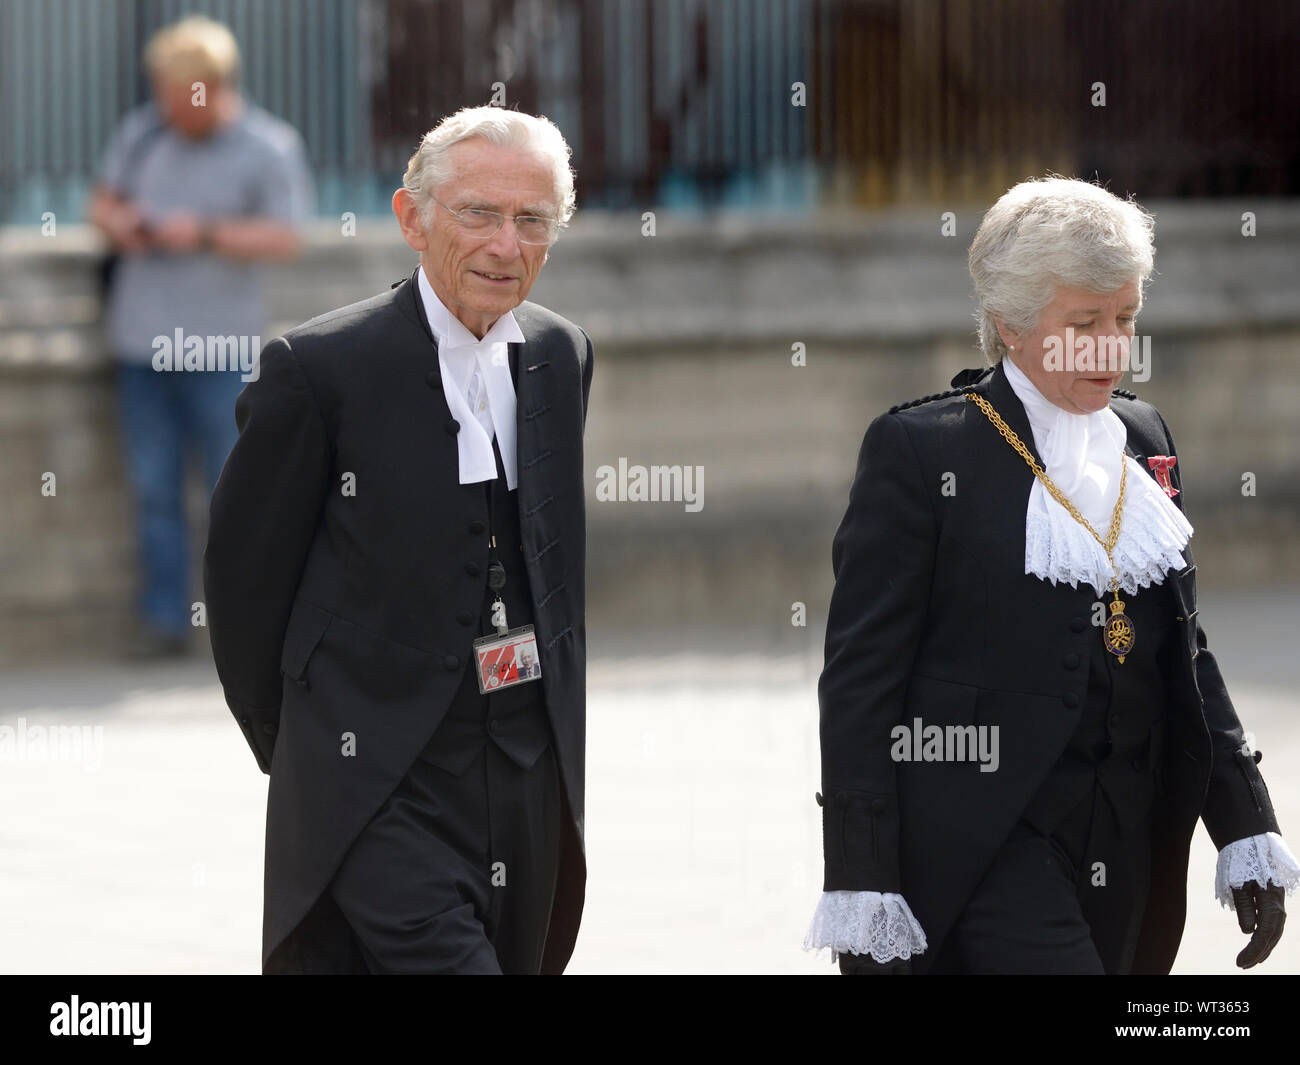 Norman Fowler, Baron Fowler - Speaker in the House of Lords (centre) with Sarah Clarke 'Black Rod' (Lady Usher of the Black Rod) walking from Parliame Stock Photo